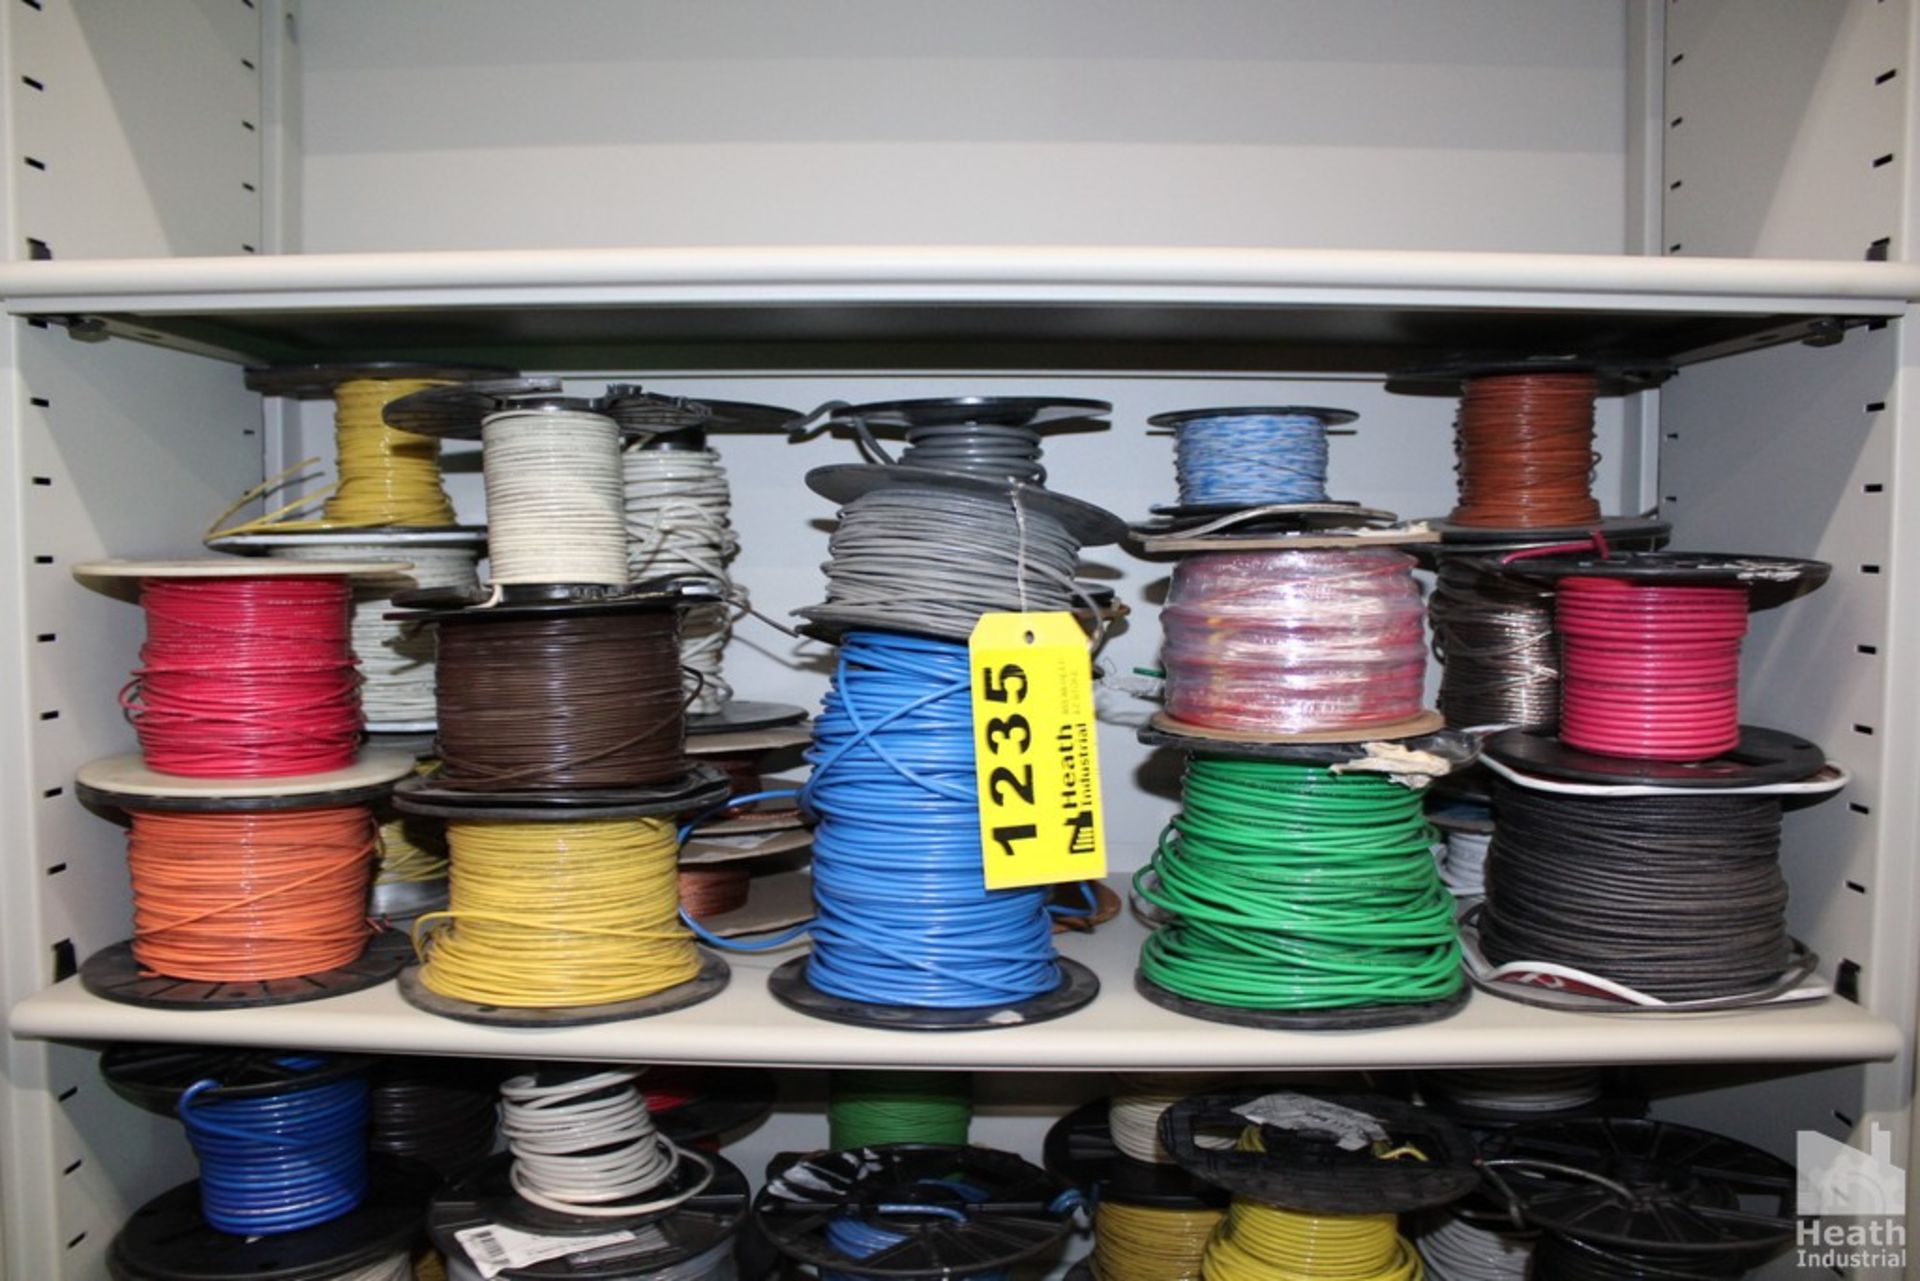 (24) ASSORTED SPOOLS OF WIRE ON SHELF